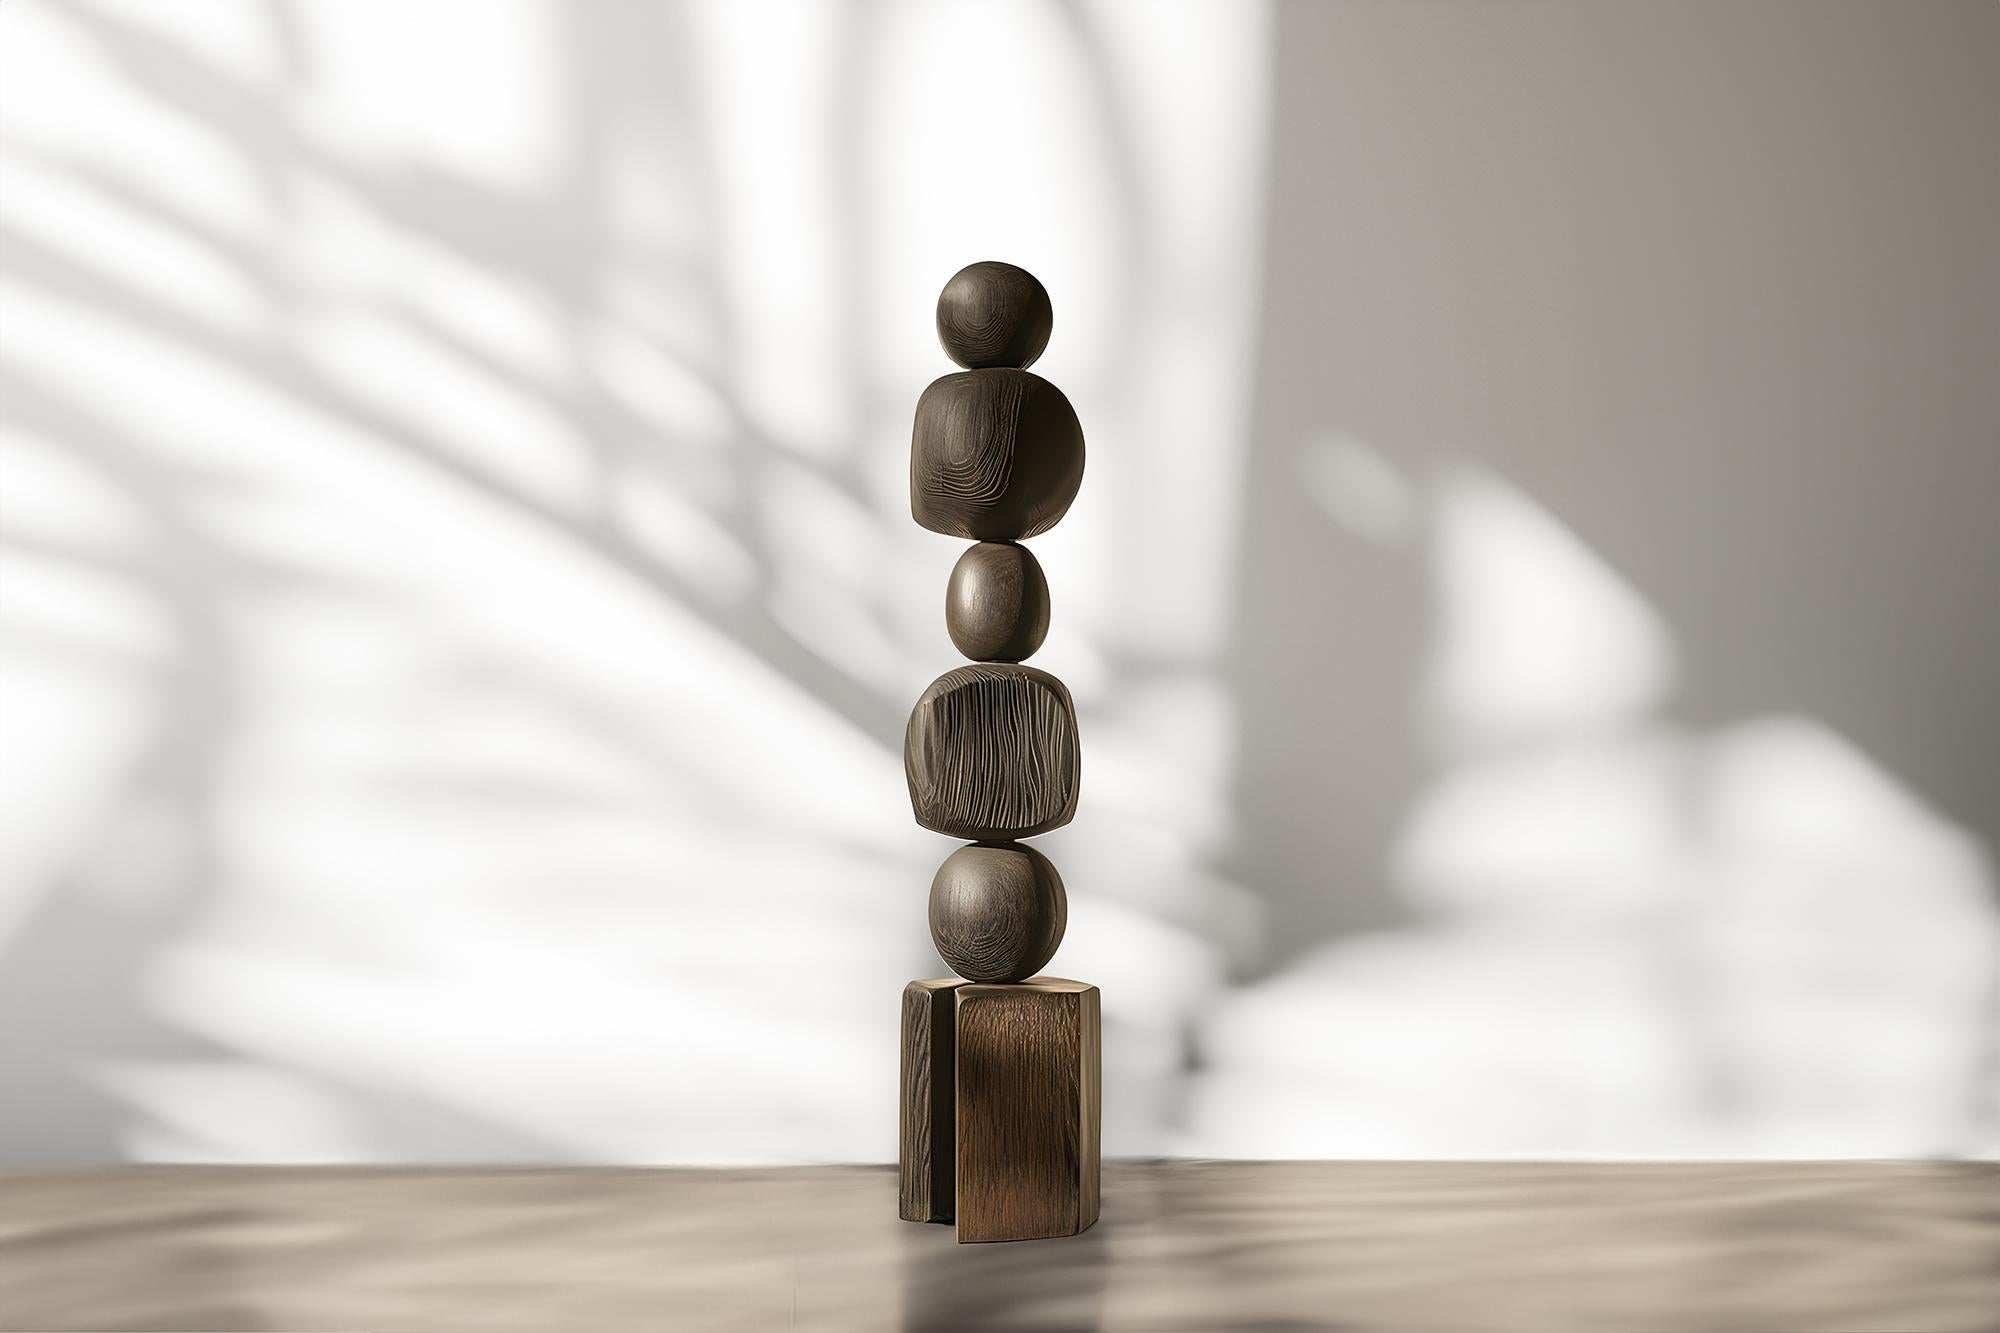 Abstract Dark Art in Modern Sculpture, Burned Oak by Escalona, Still Stand No94

Joel Escalona's wooden standing sculptures are objects of raw beauty and serene grace. Each one is a testament to the power of the material, with smooth curves that